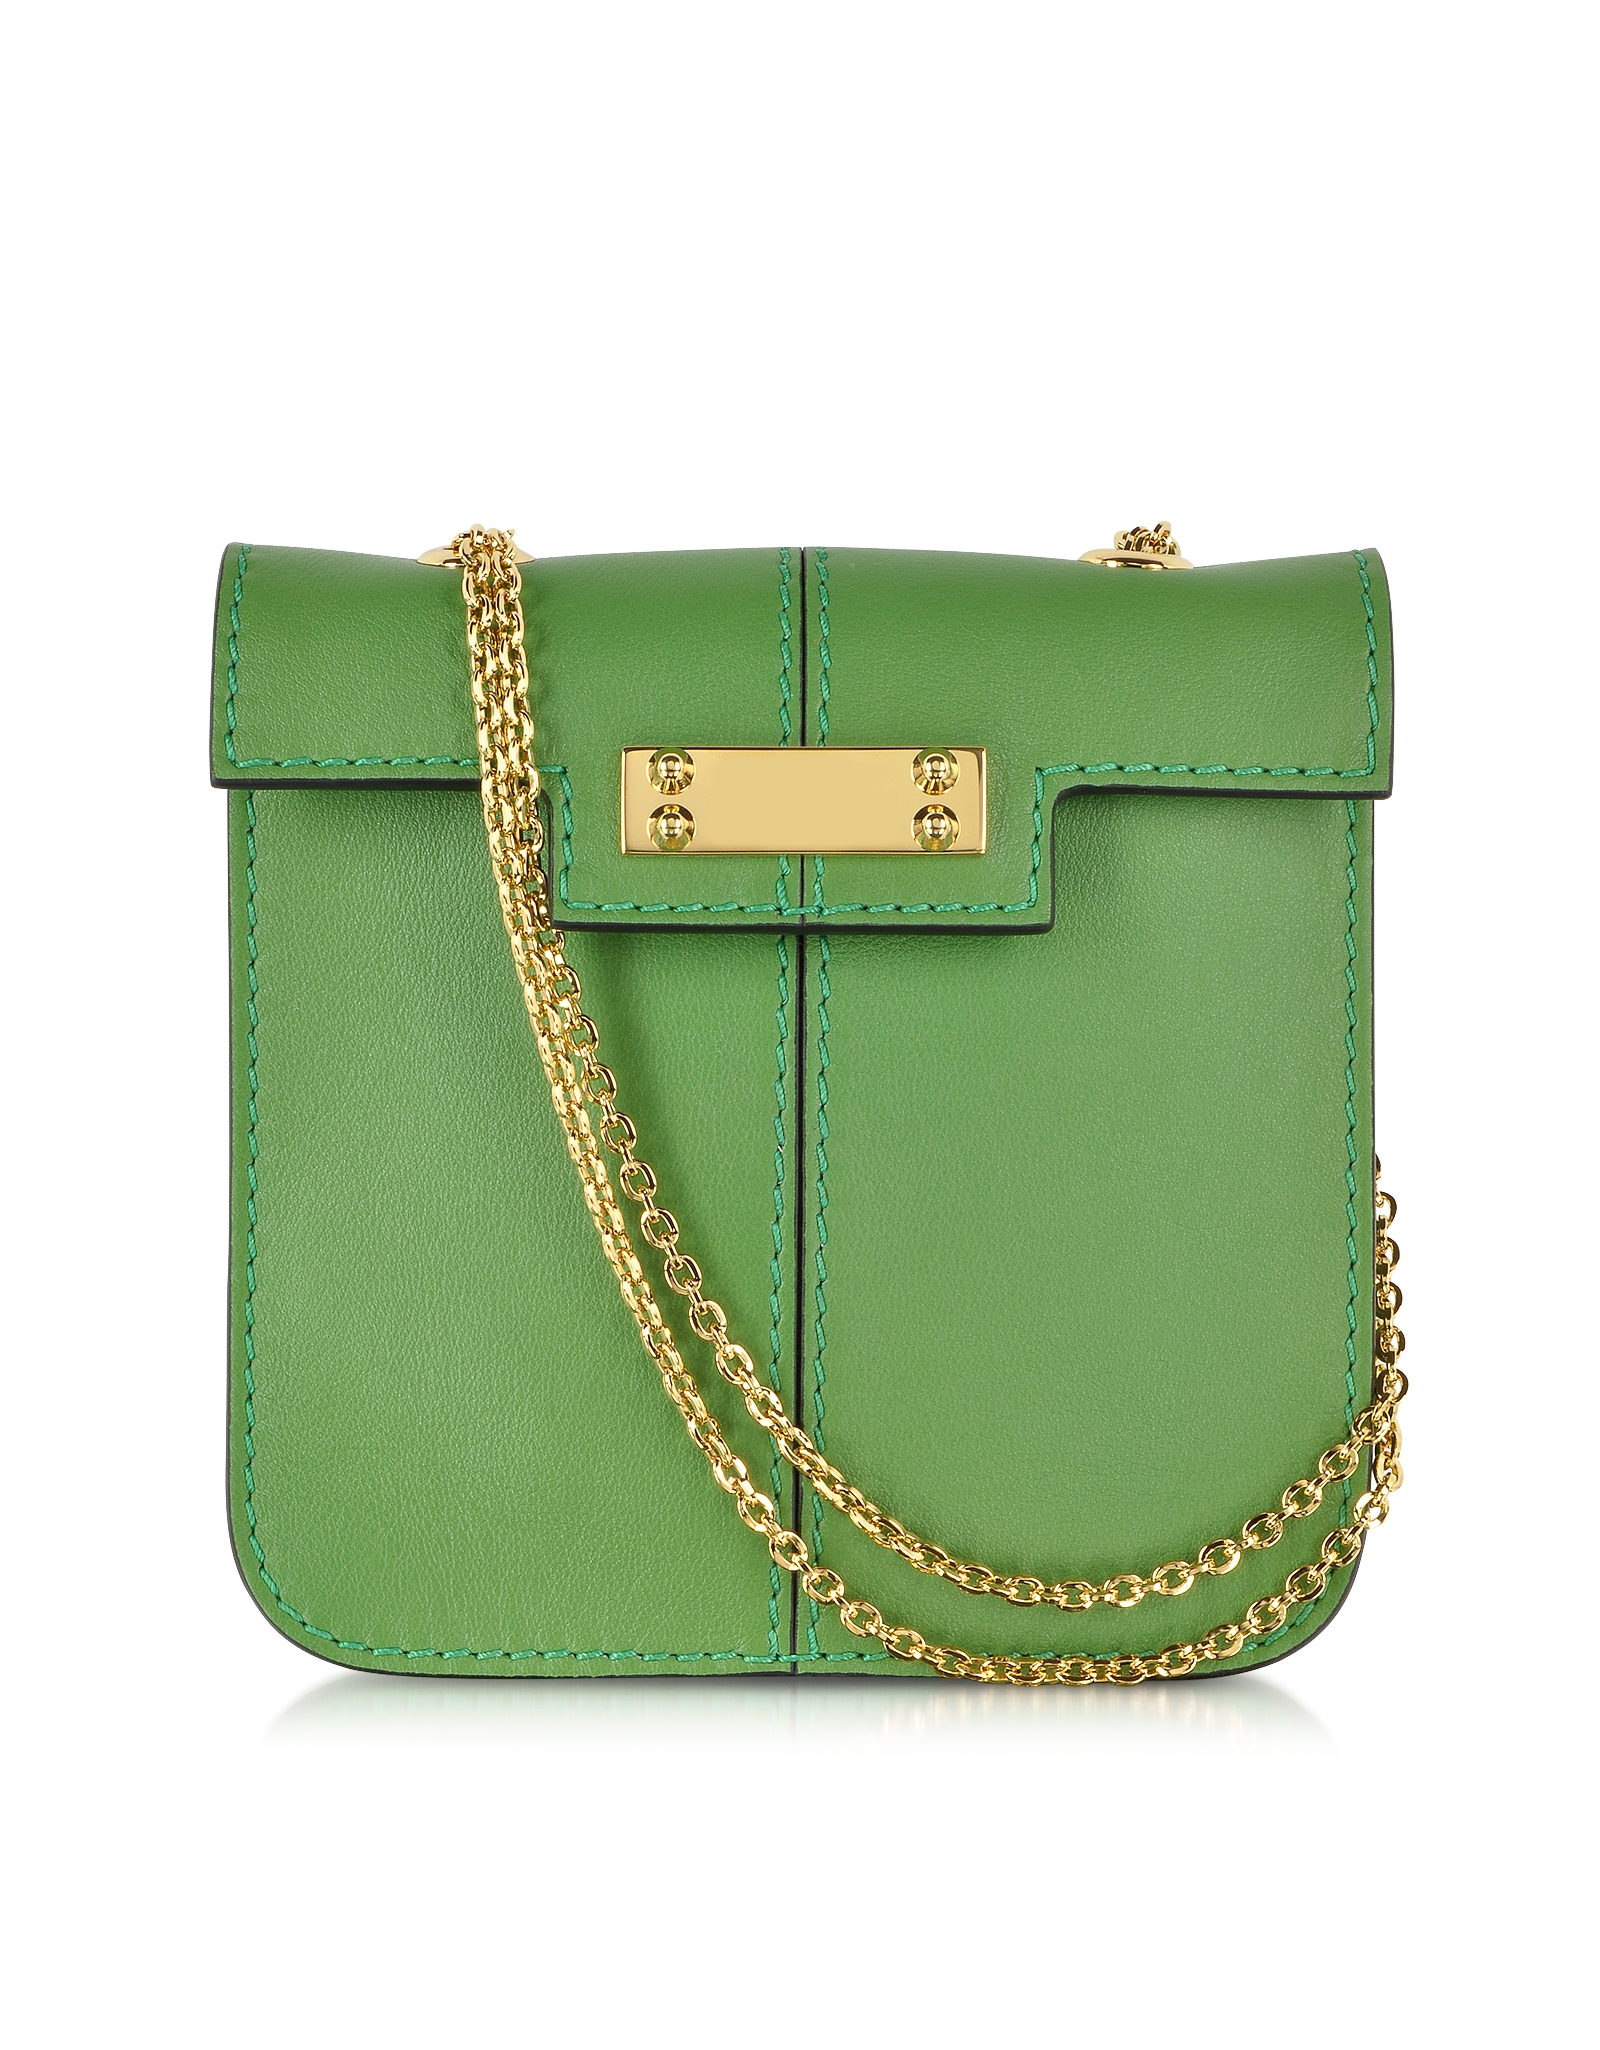 Lyst - Valentino Mini Shoulder Bag with Chain Strap in Green